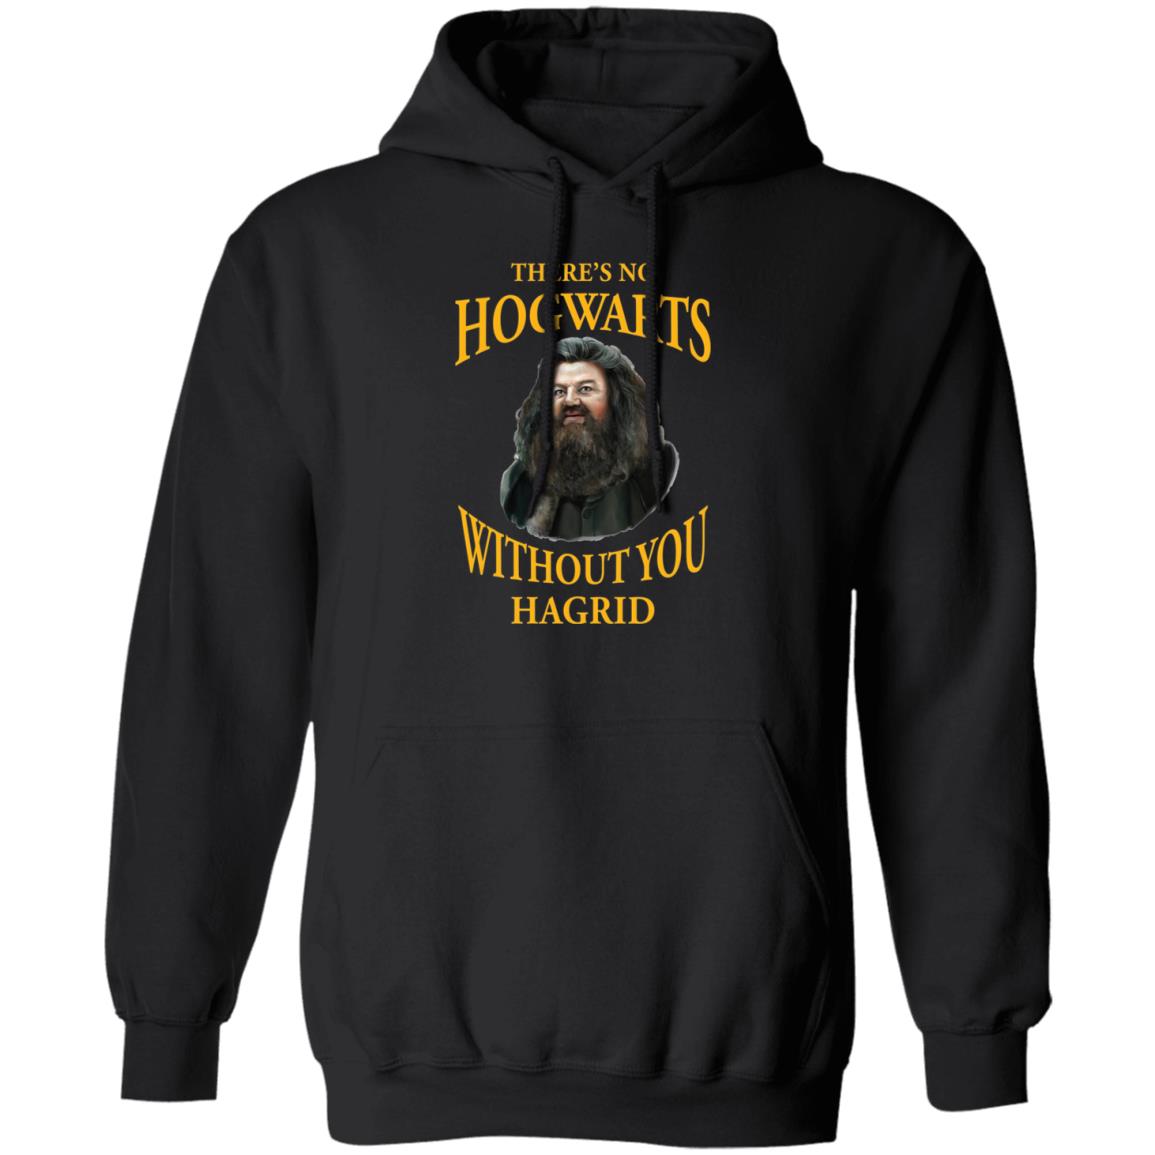 There’s No Hogwarts Without You Hagrid Shirt 1